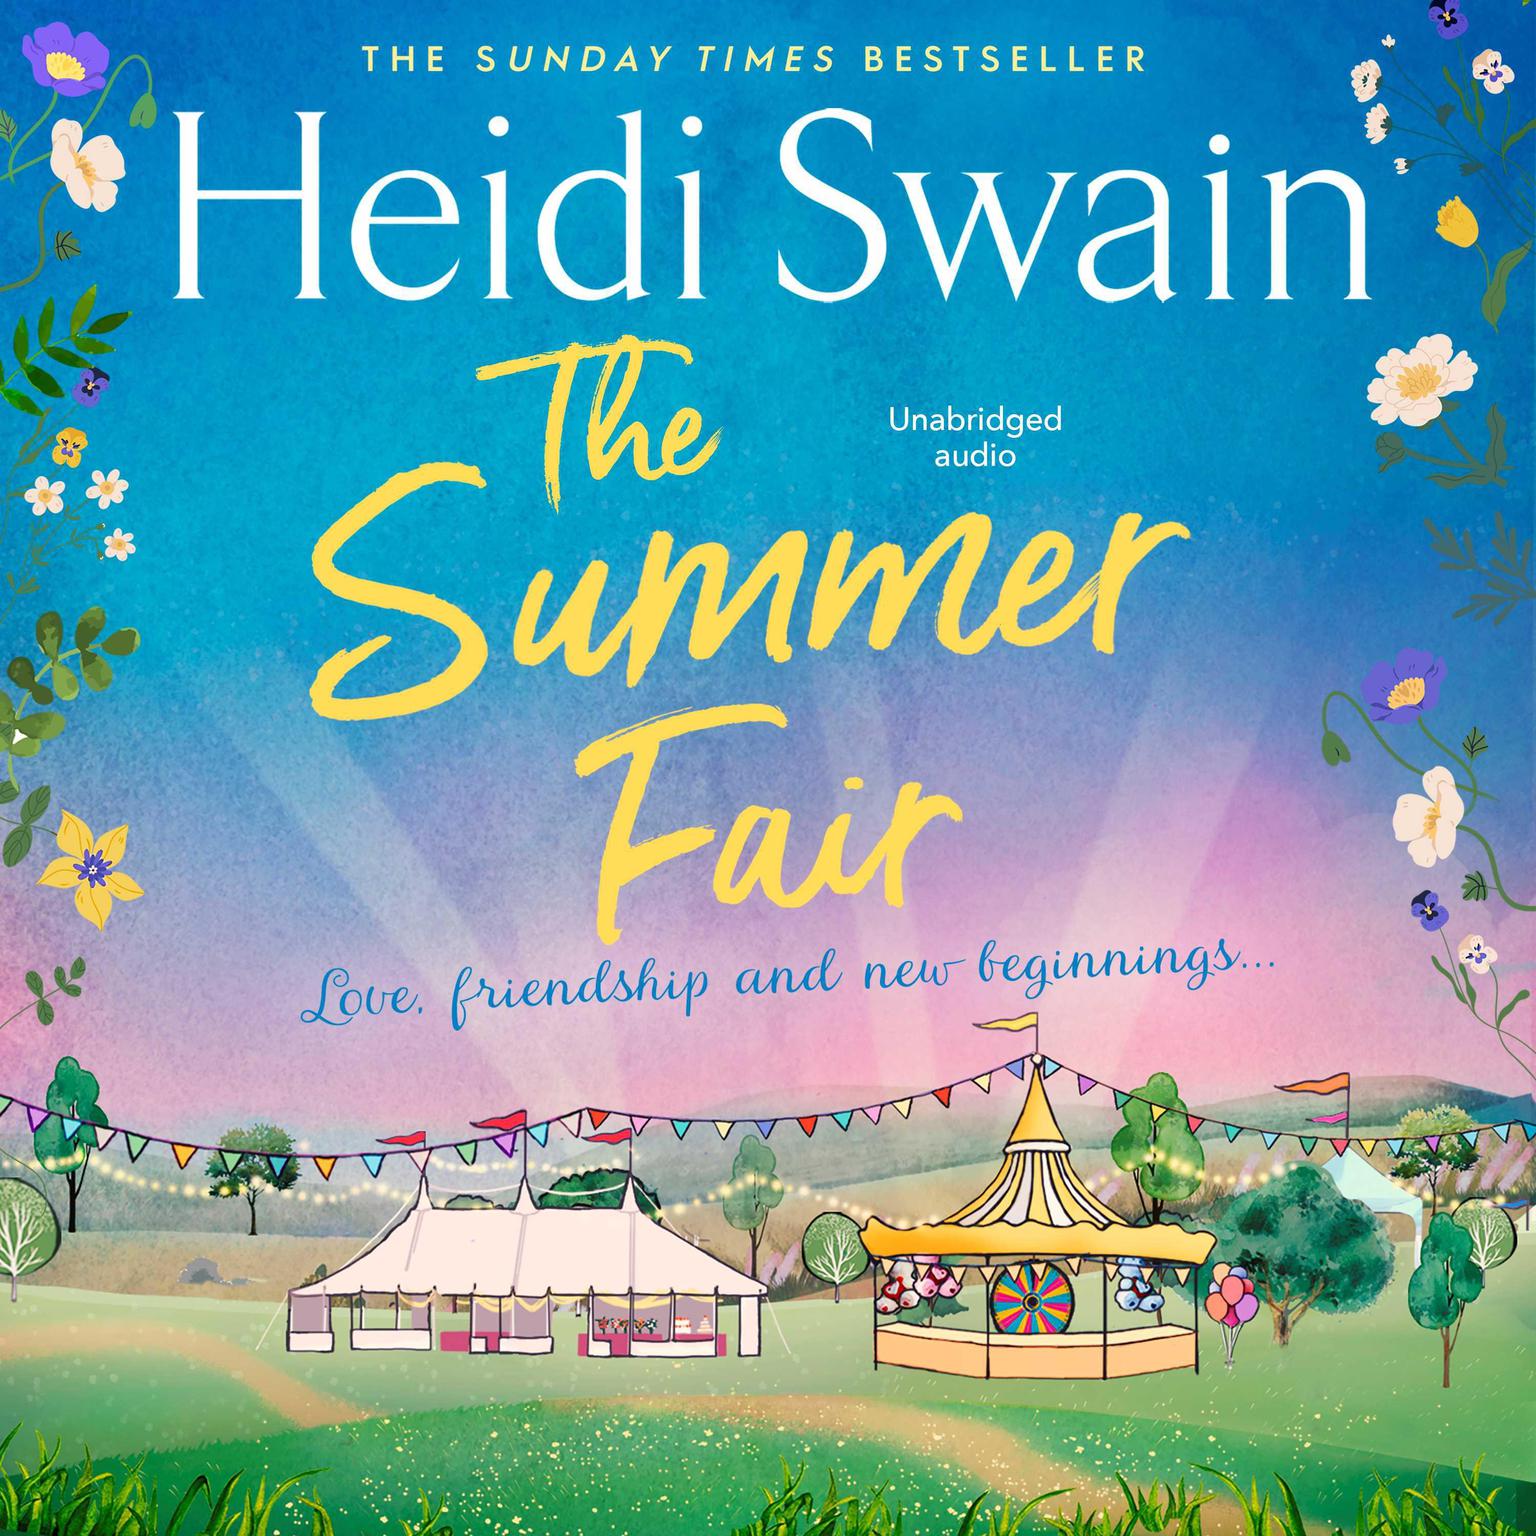 The Summer Fair: the most perfect summer read filled with sunshine and celebrations Audiobook, by Heidi Swain